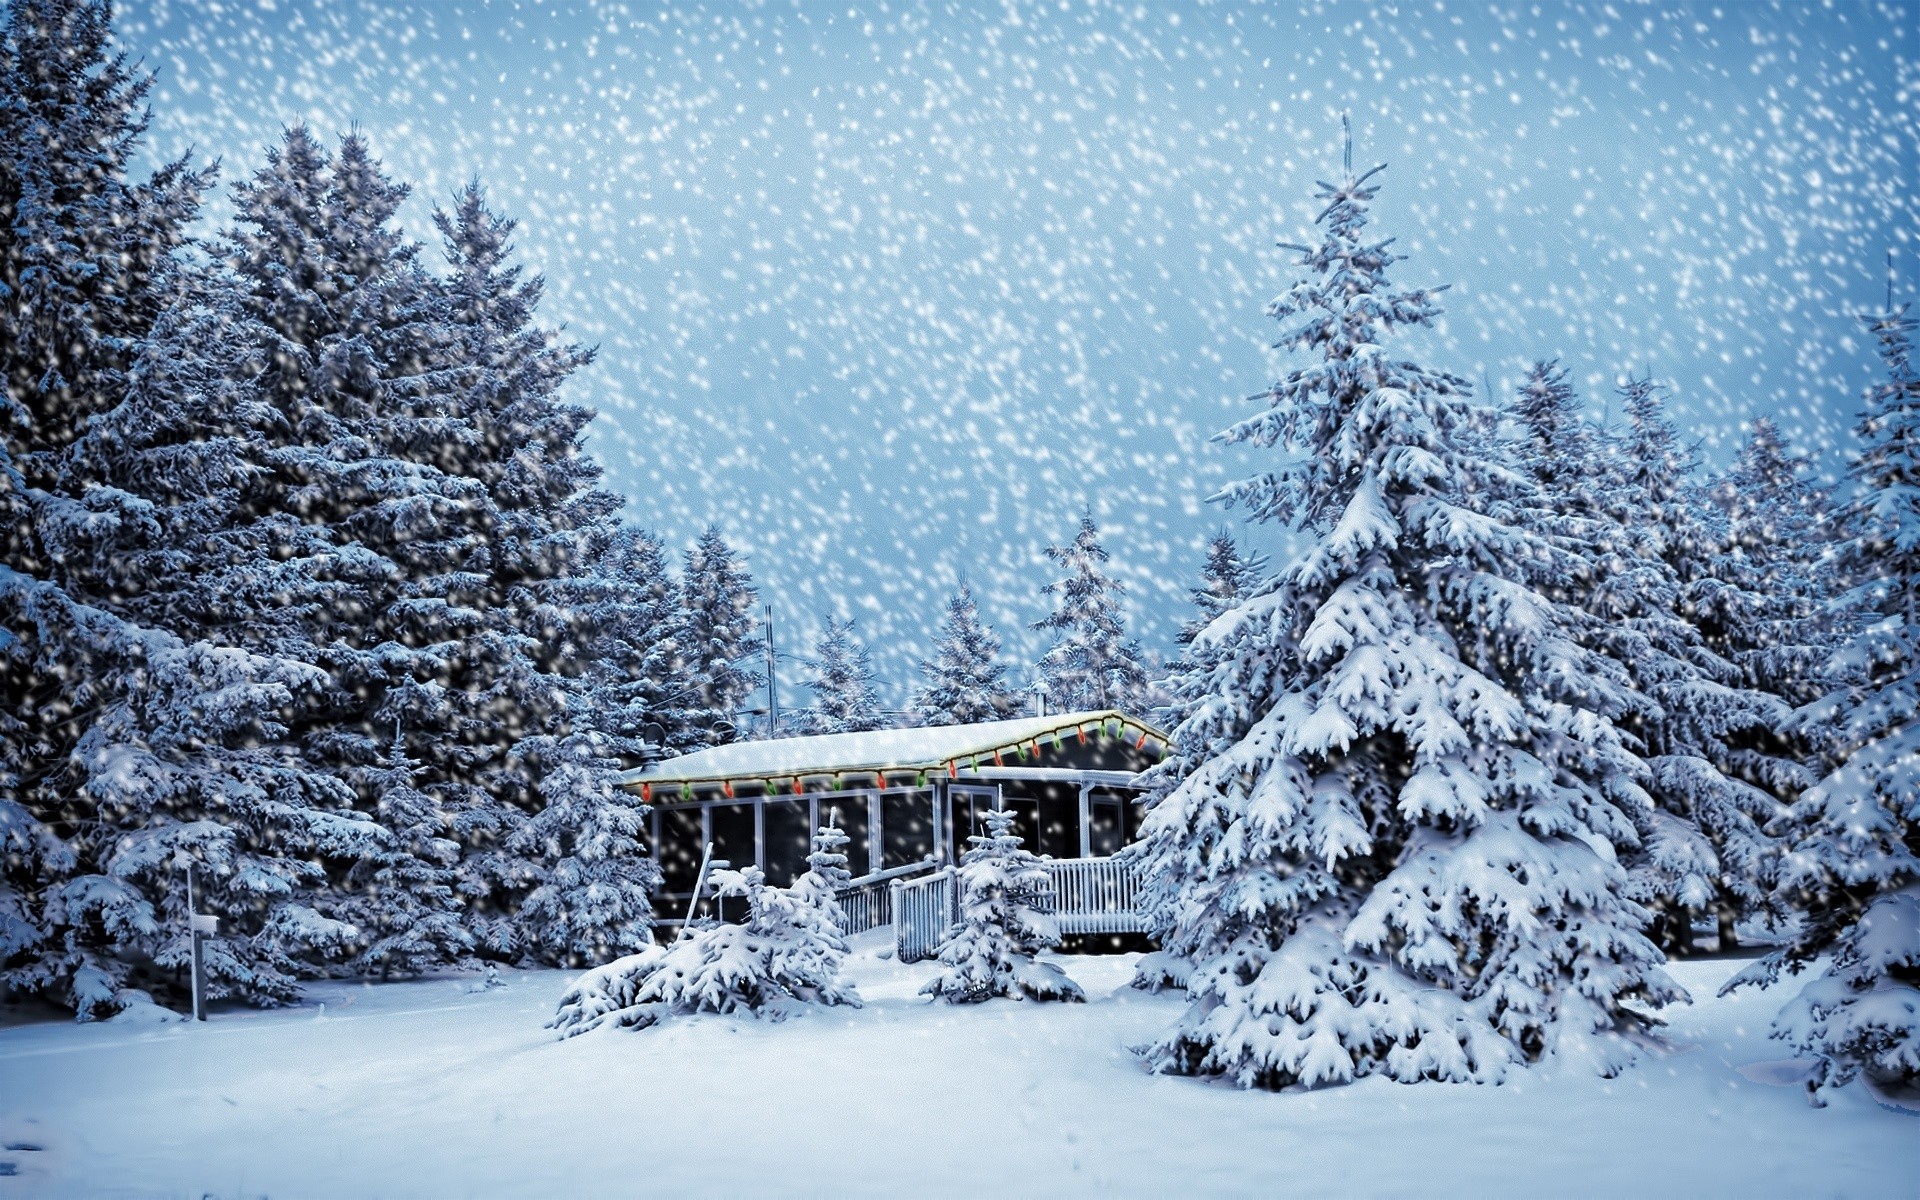 General 1920x1200 winter cabin snowflakes HDR nature